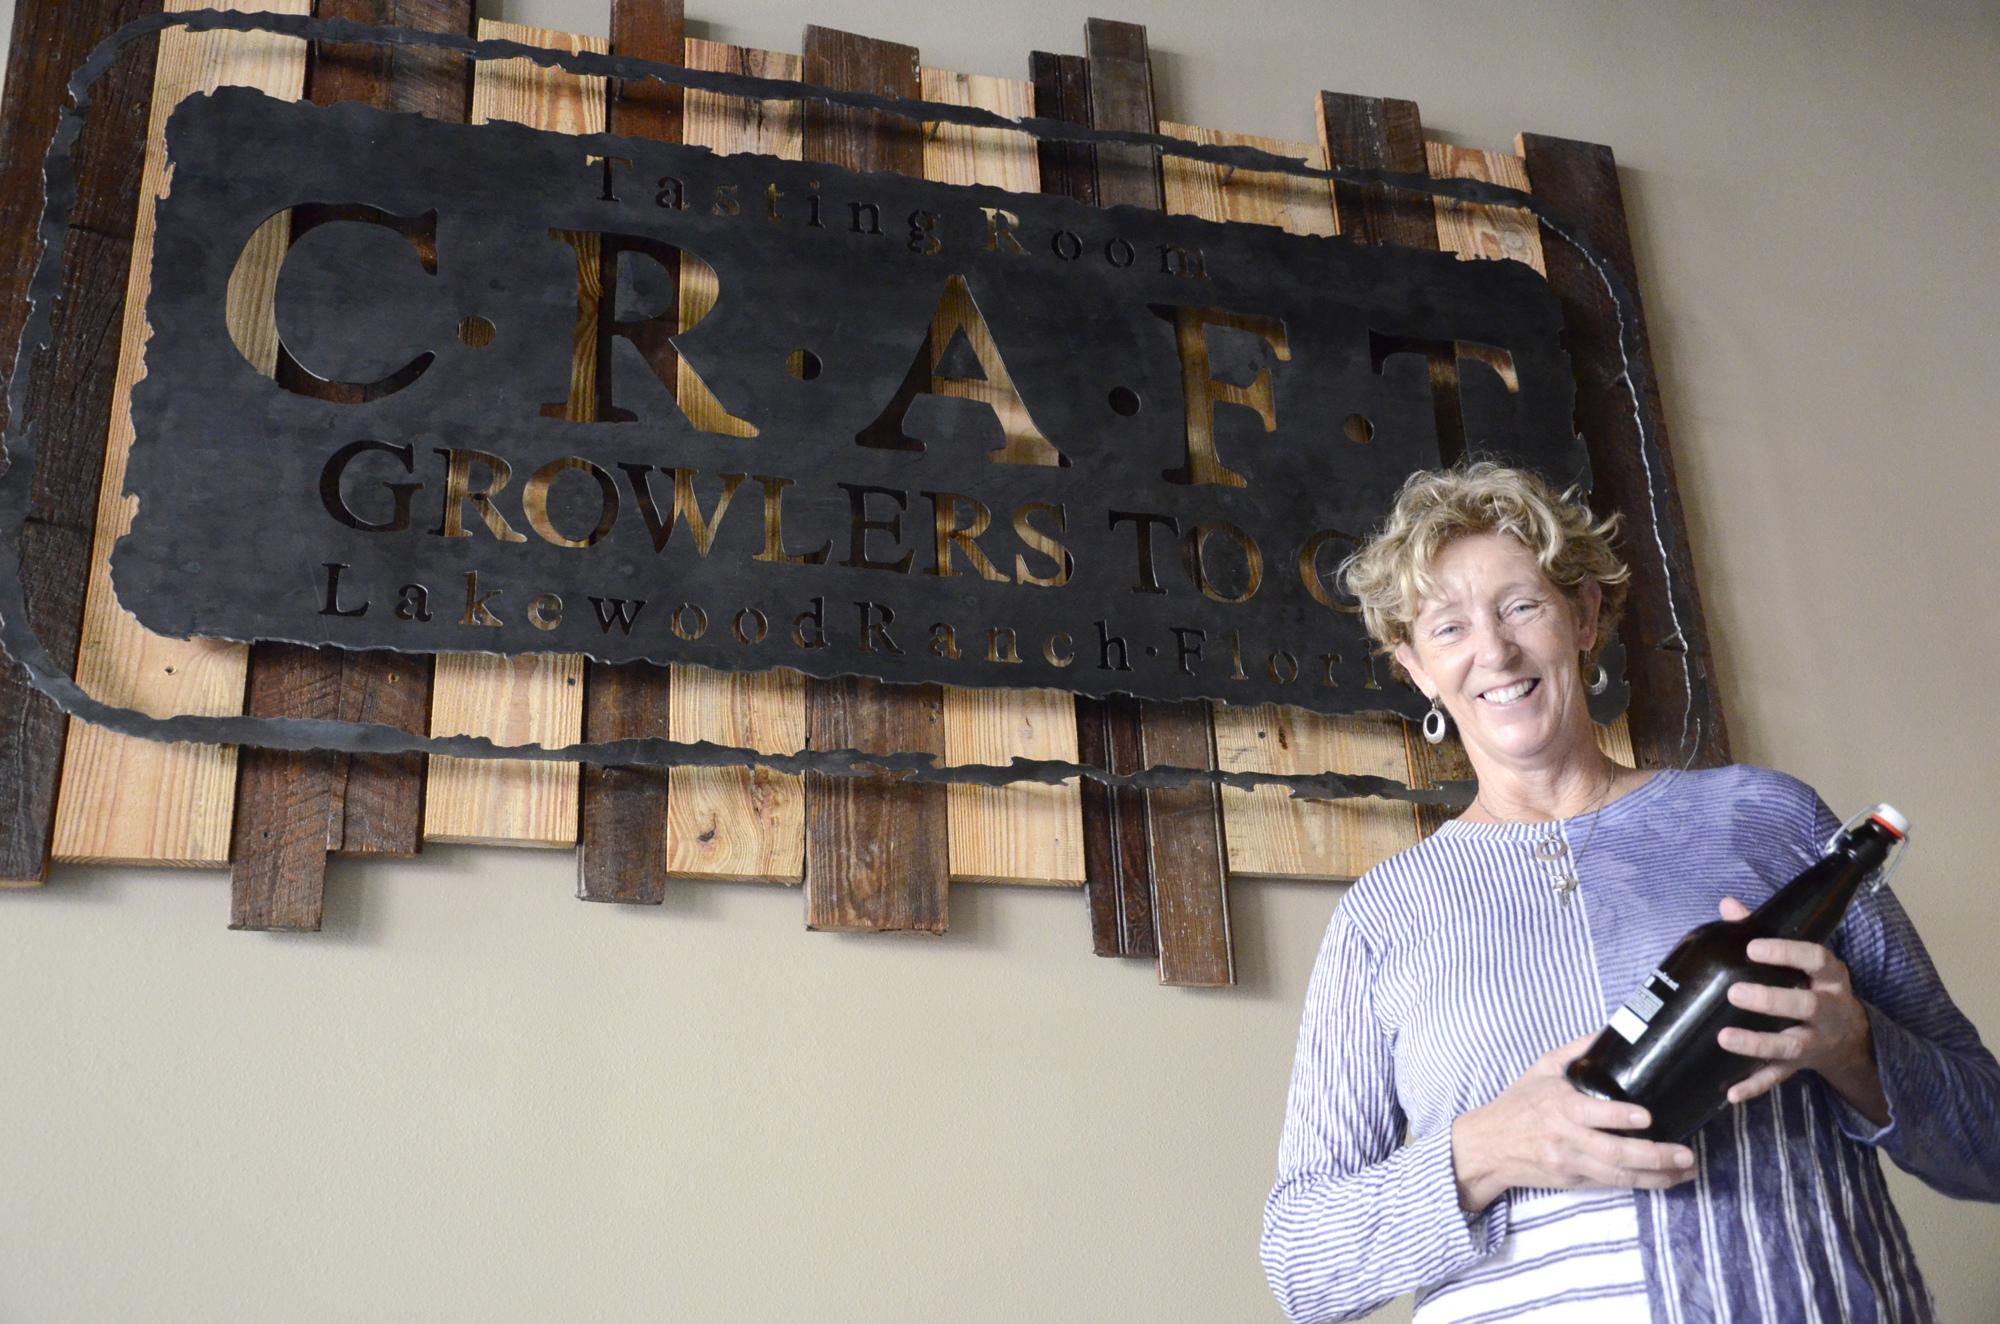 Siesta Key resident Jeanne Dooley wants Craft Growlers to Go to be a relaxing atmosphere, and a place people can learn more about craft beer.